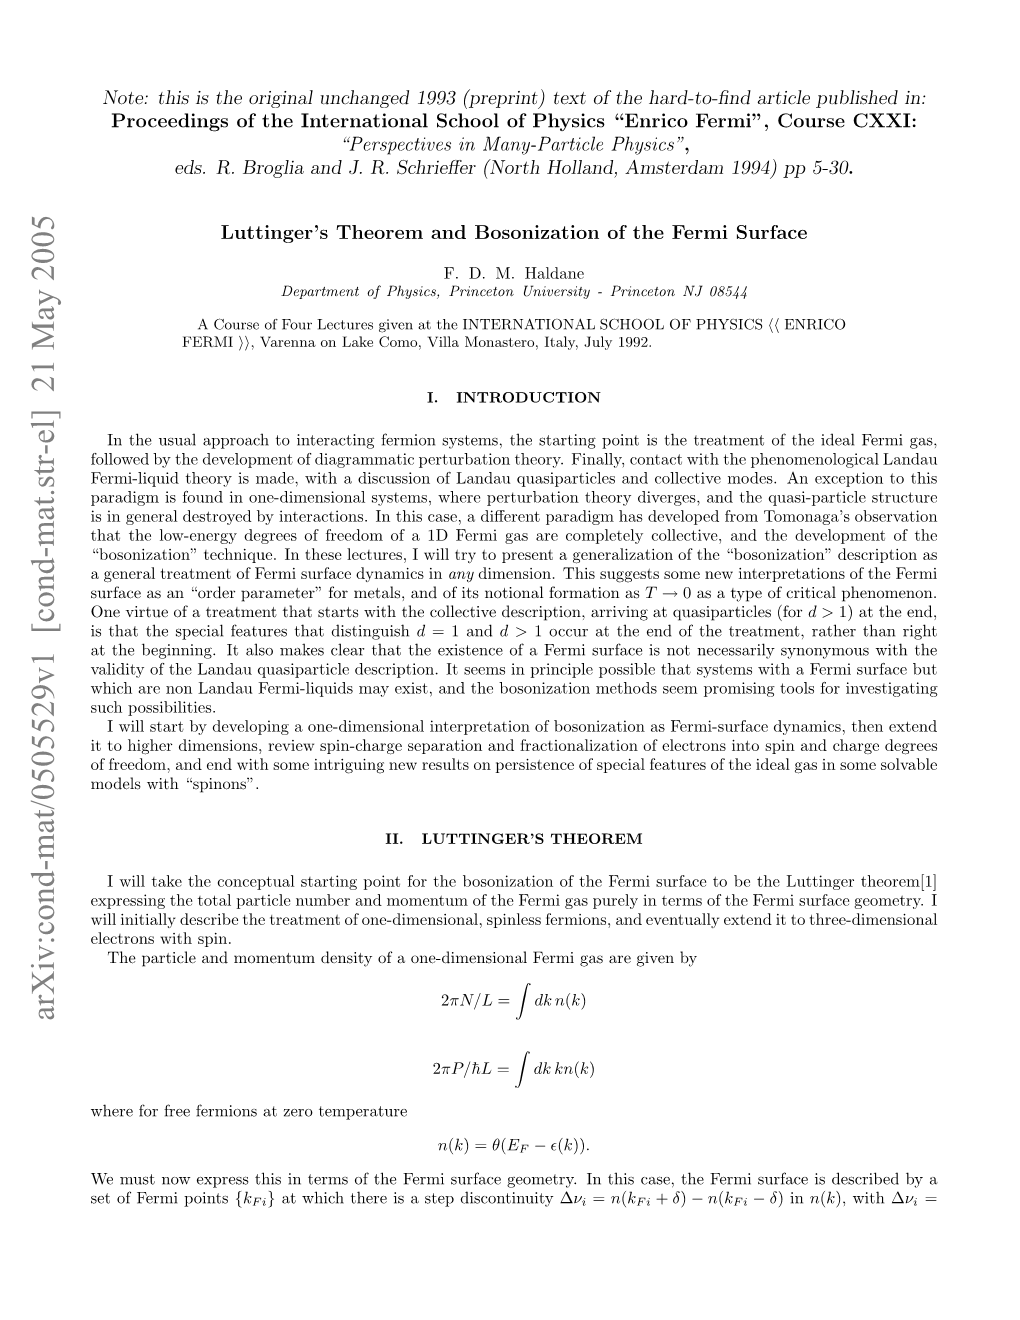 Luttinger's Theorem and Bosonization of the Fermi Surface